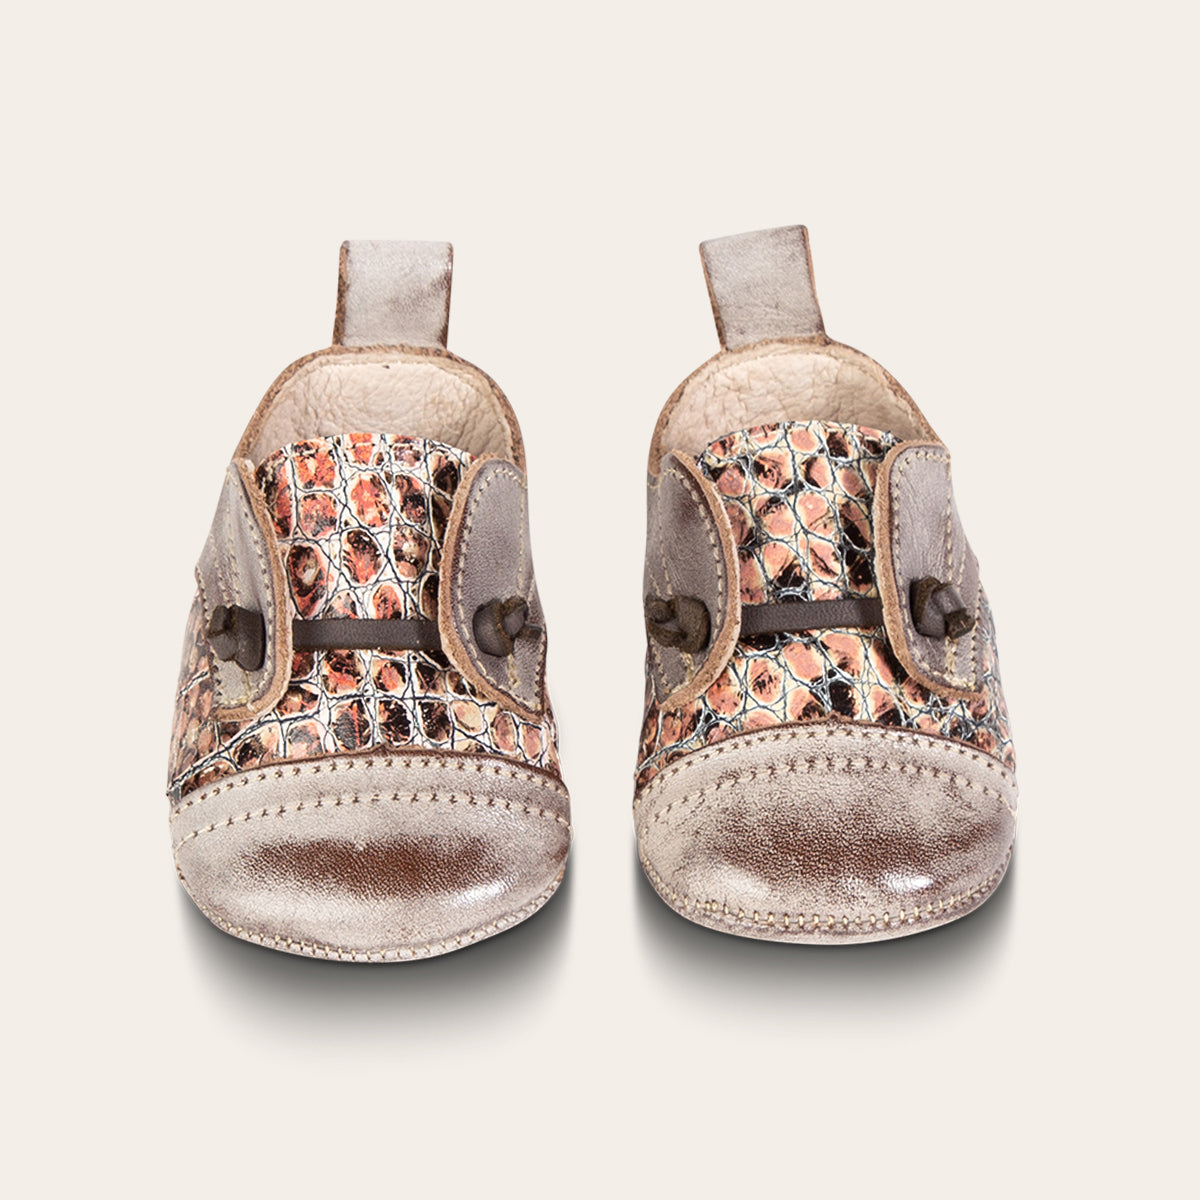 front view showing contrasting decorative knotted leather lace on FREEBIRD infant baby Mabel pink multi leather shoe